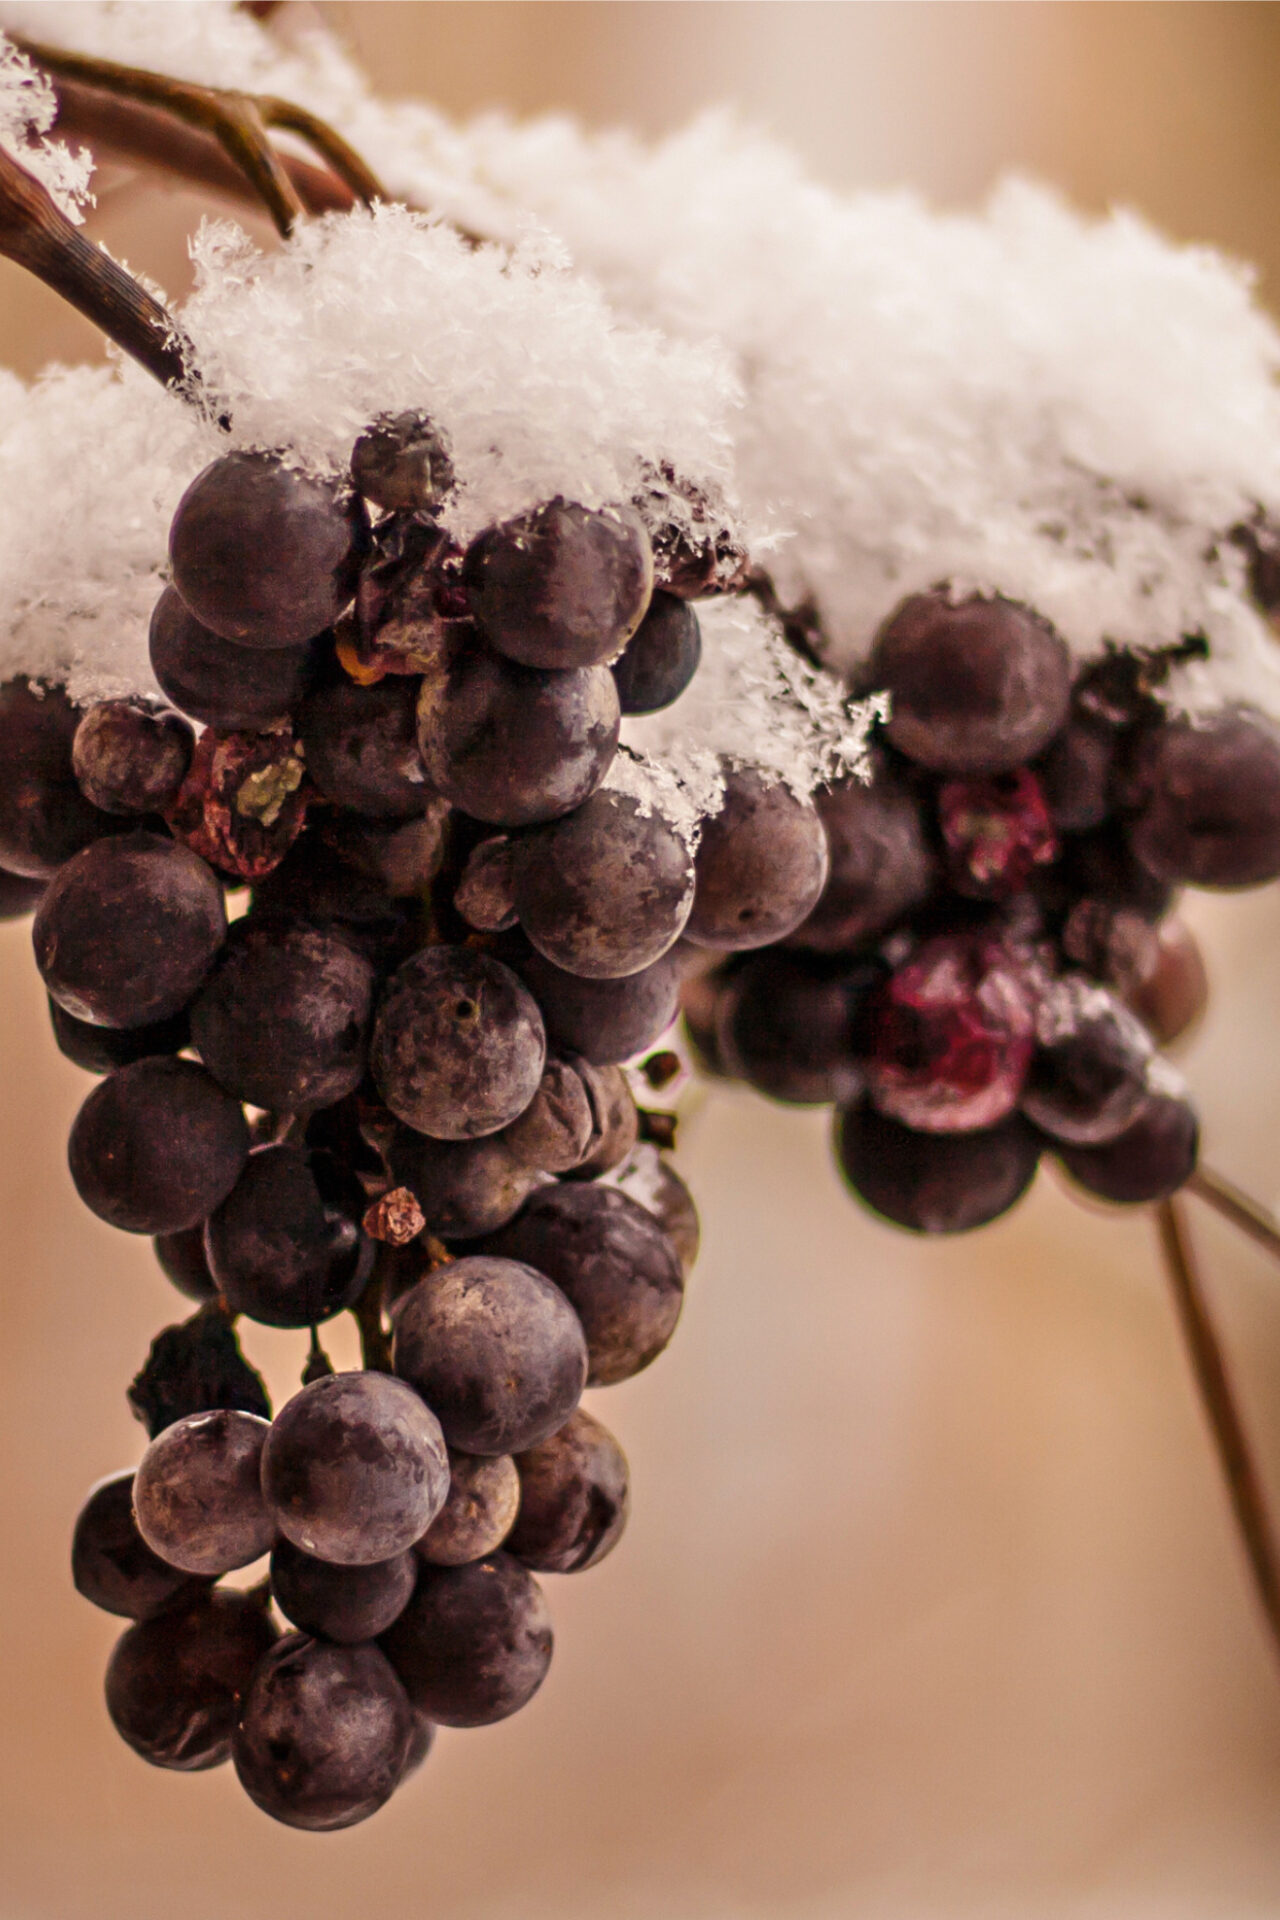 Ice Wine grapes with snow on vineyard